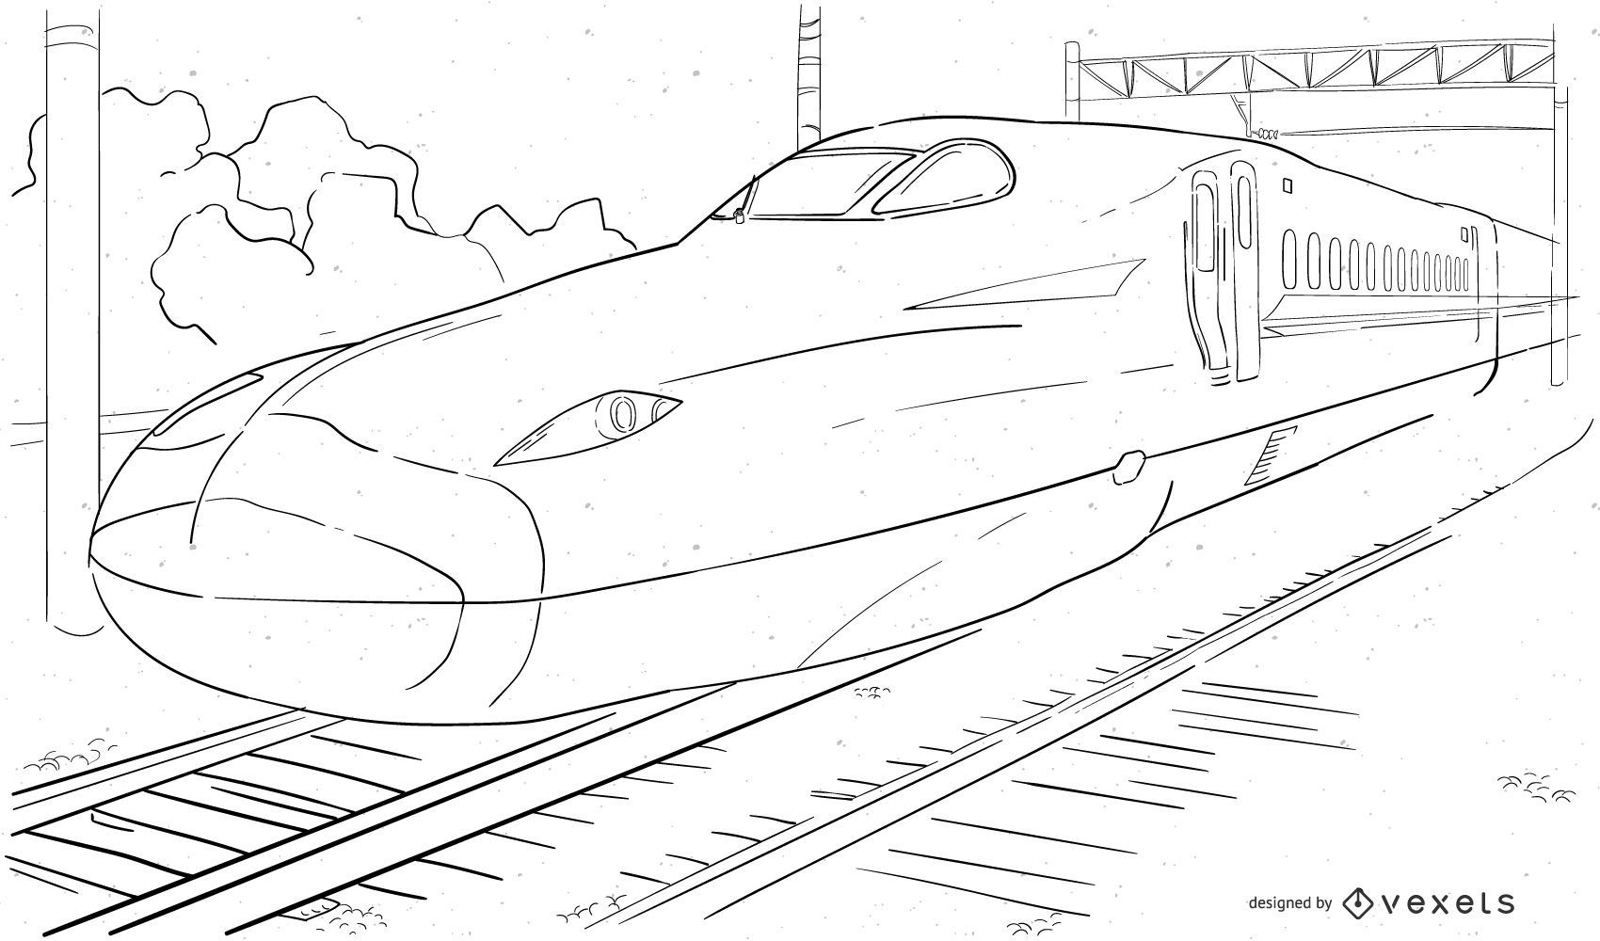 Abstract Sketch Black & White Bullet Train